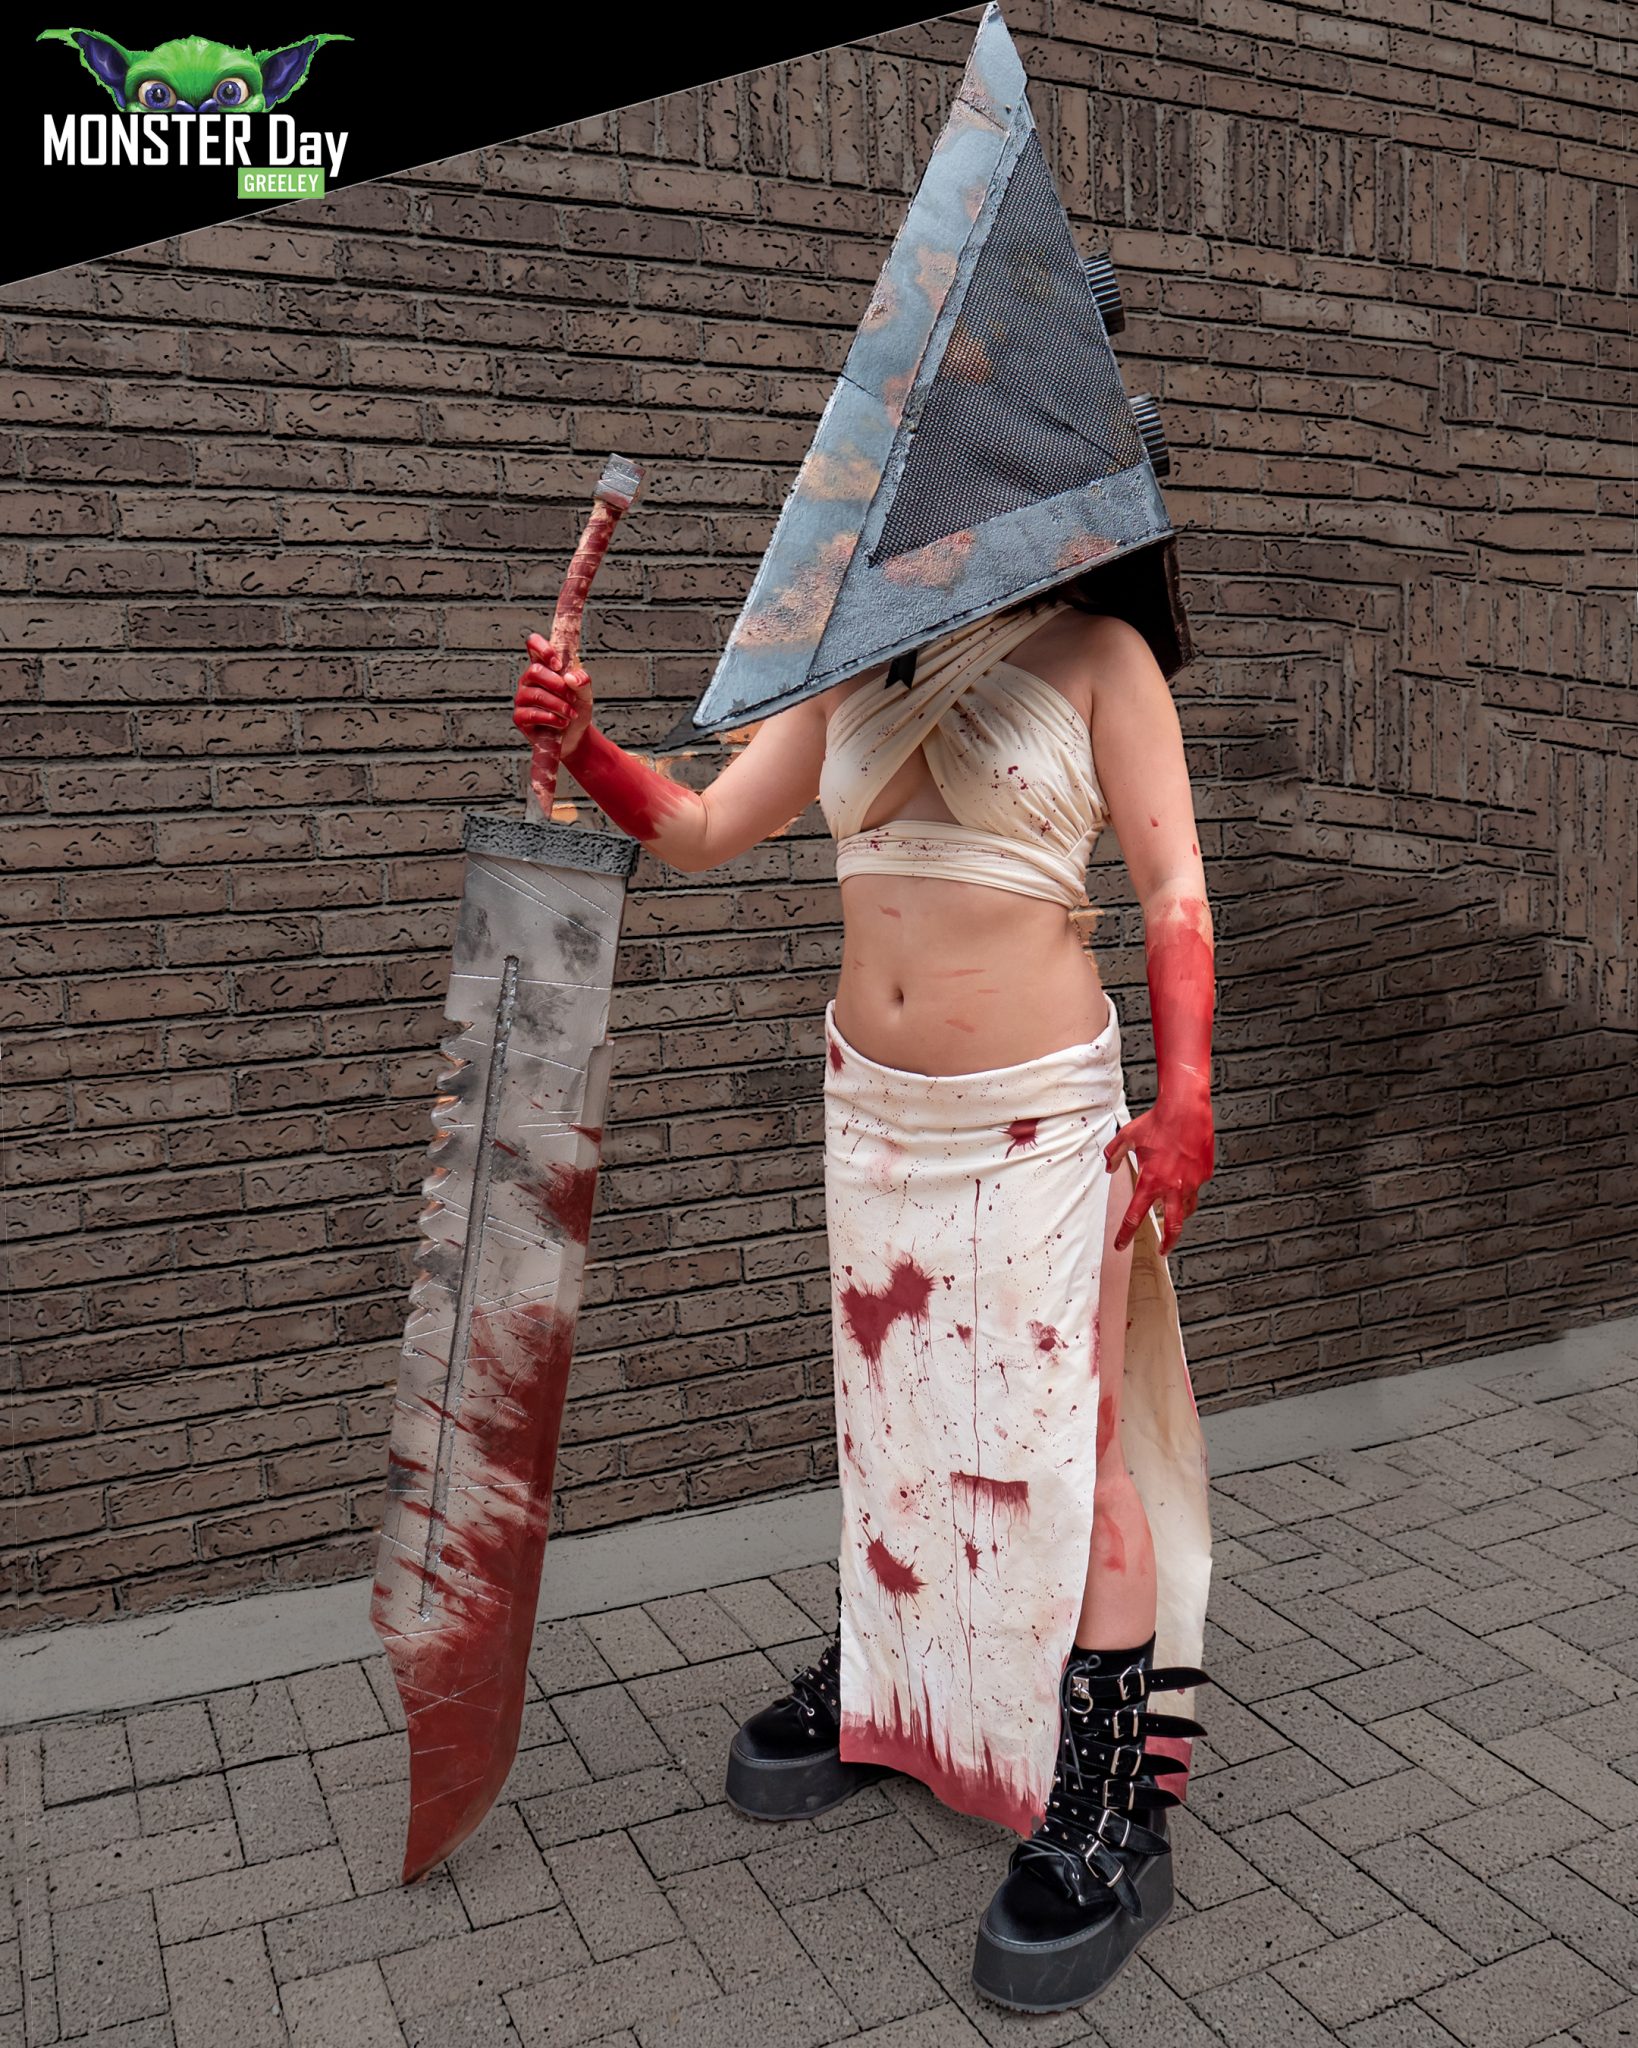 Cosplayer Transforms Into Gender-Swapped Pyramid Head